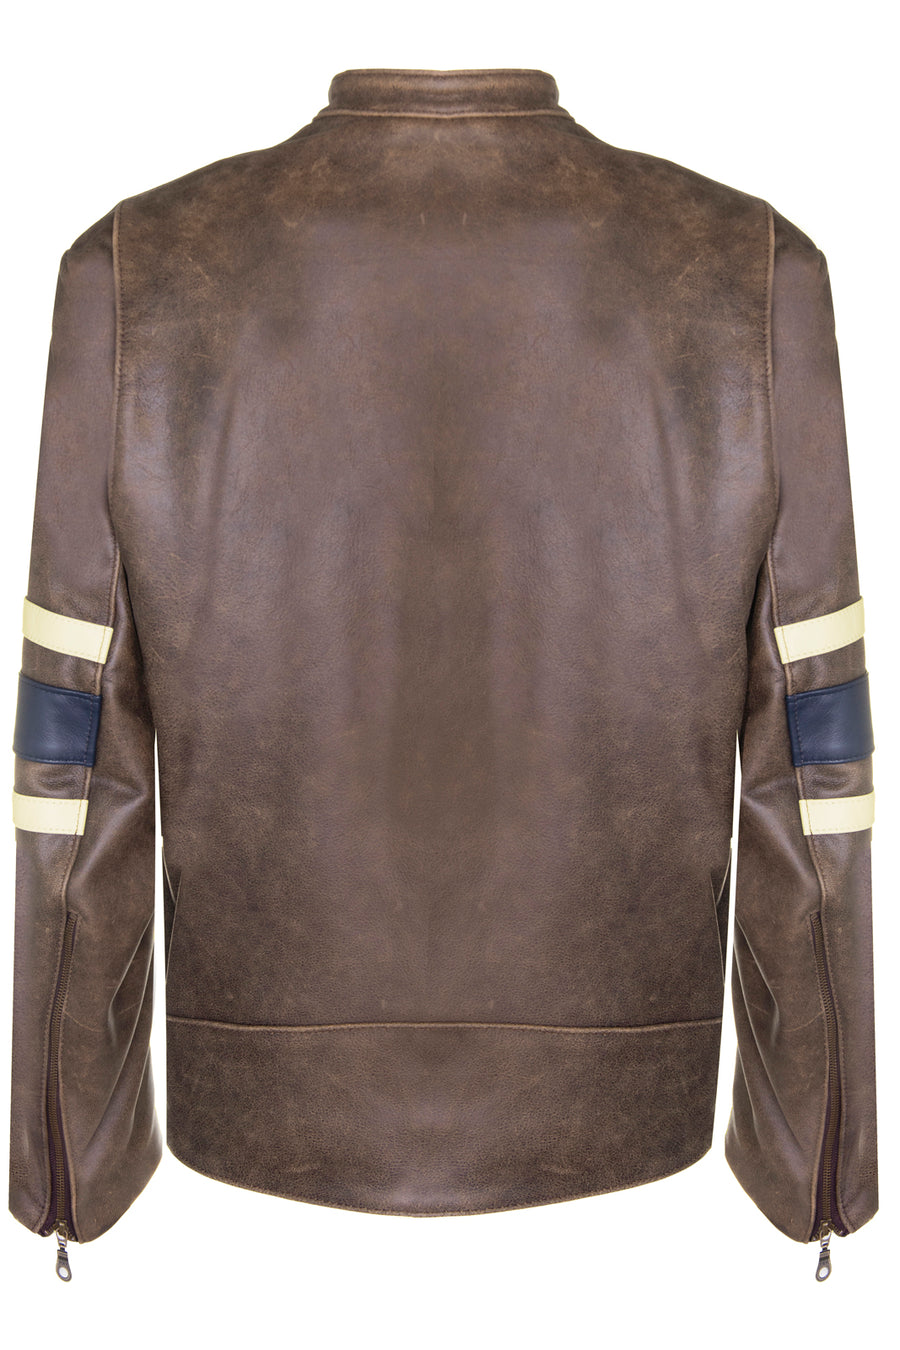 CUSTOM MADE X-Men 3 Wolverine Style Leather Jacket As Worn by Hugh Jackman in The Last Stand